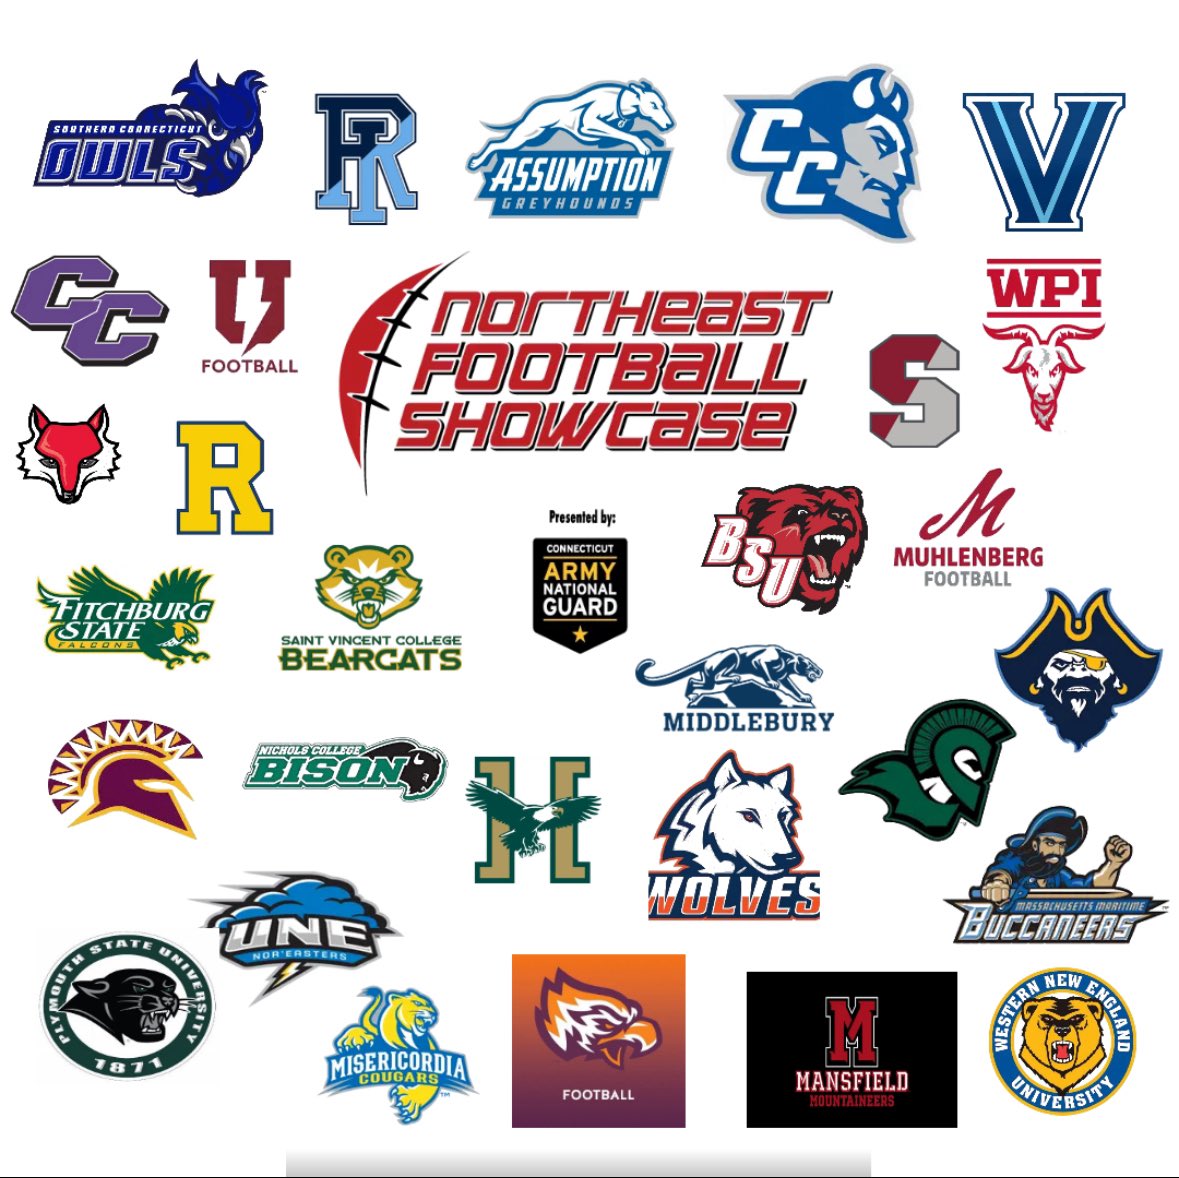 The Northeast Football Showcase is fast approaching, sign up this week! Sunday, May 5 at Xavier HS! Many college coaches will be in attendance to recruit and meet future prospects #cthsfb nutmegstategames.org/team-sports/fo…